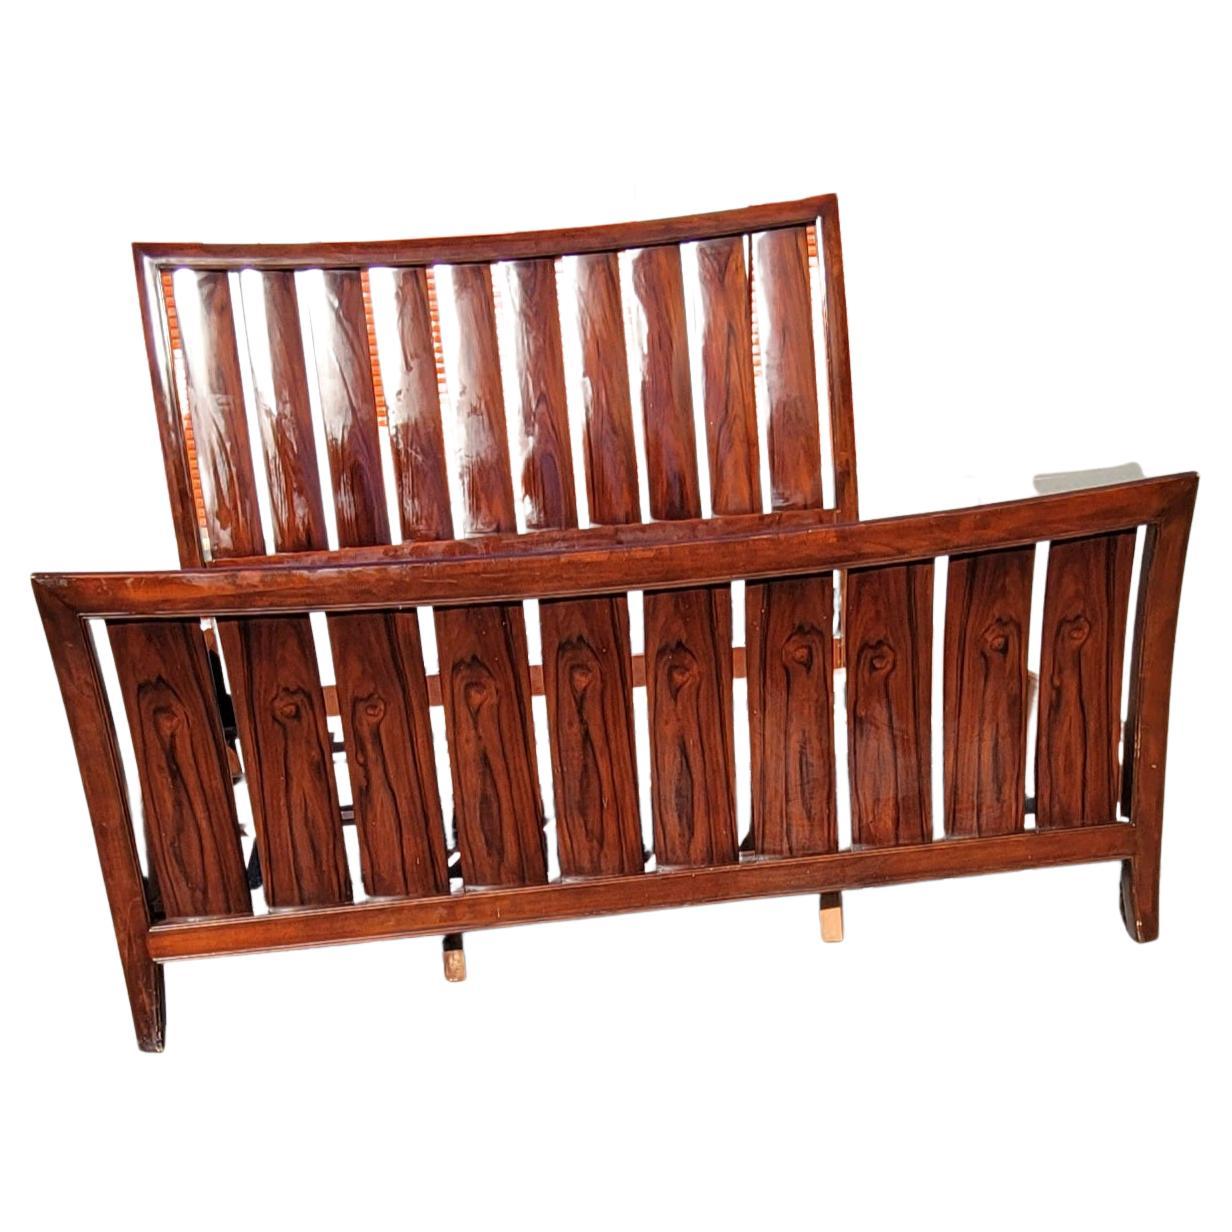 Absolutely beautiful King Size Slatted Sleigh Bed in rosewood finish in very good Vintage condition. Comes with hardware and original mattress slats.
Measures 81